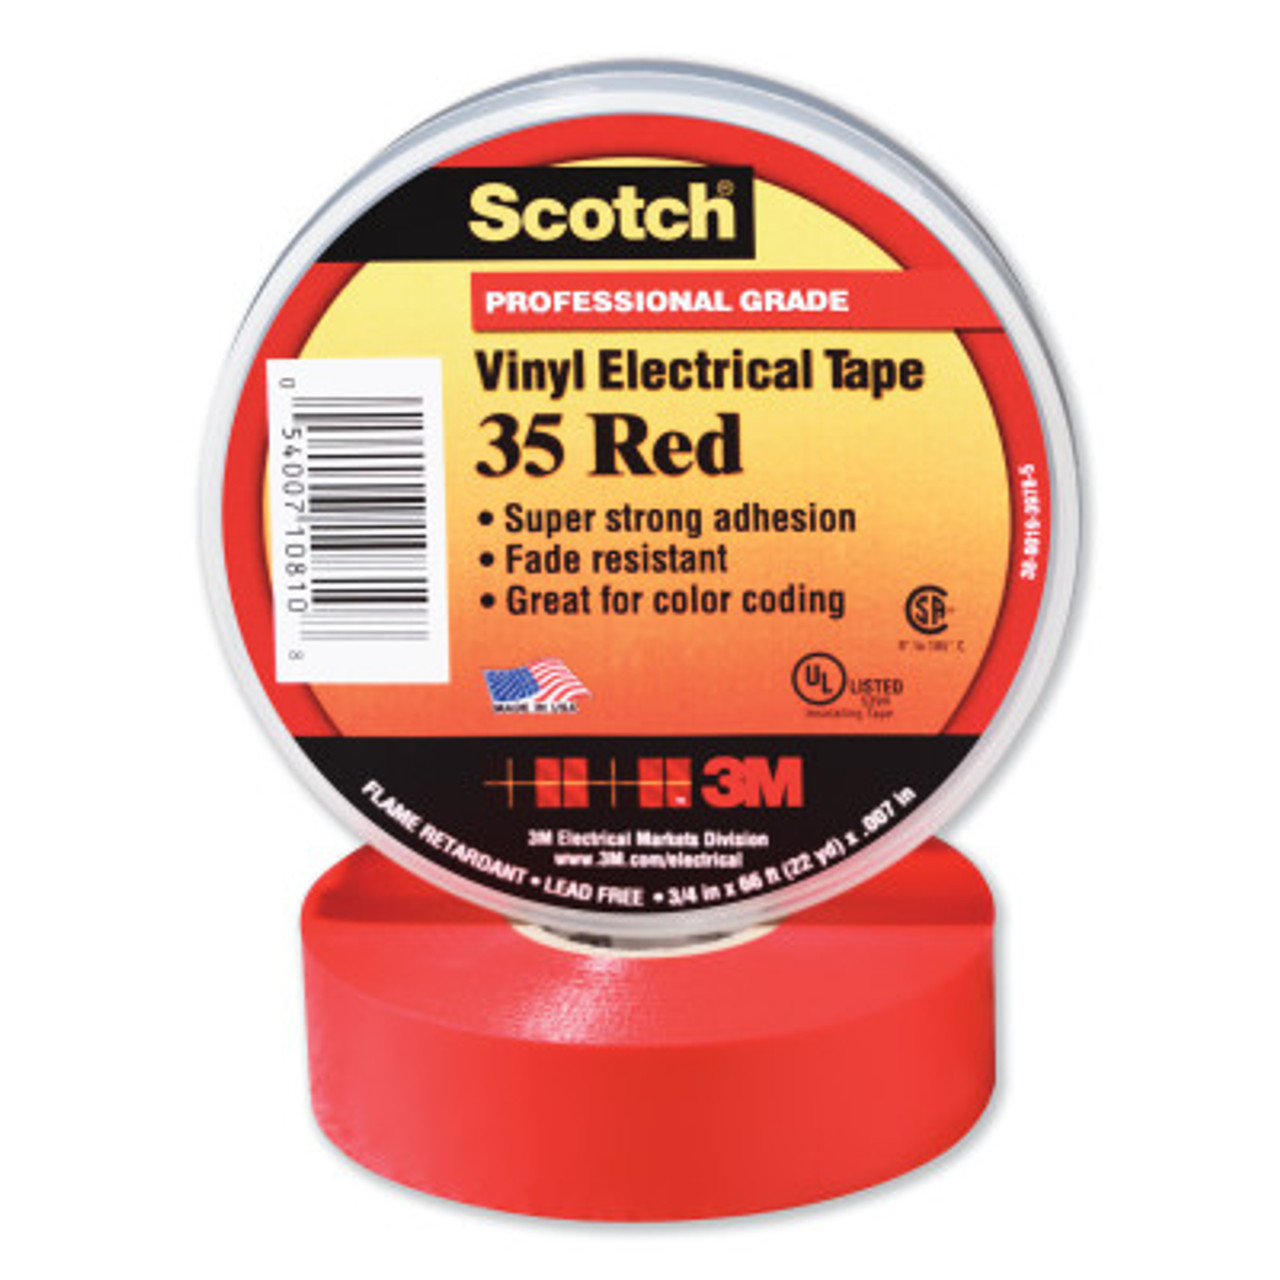 3/4 x 500 Red Labeling Tape - Case of 4